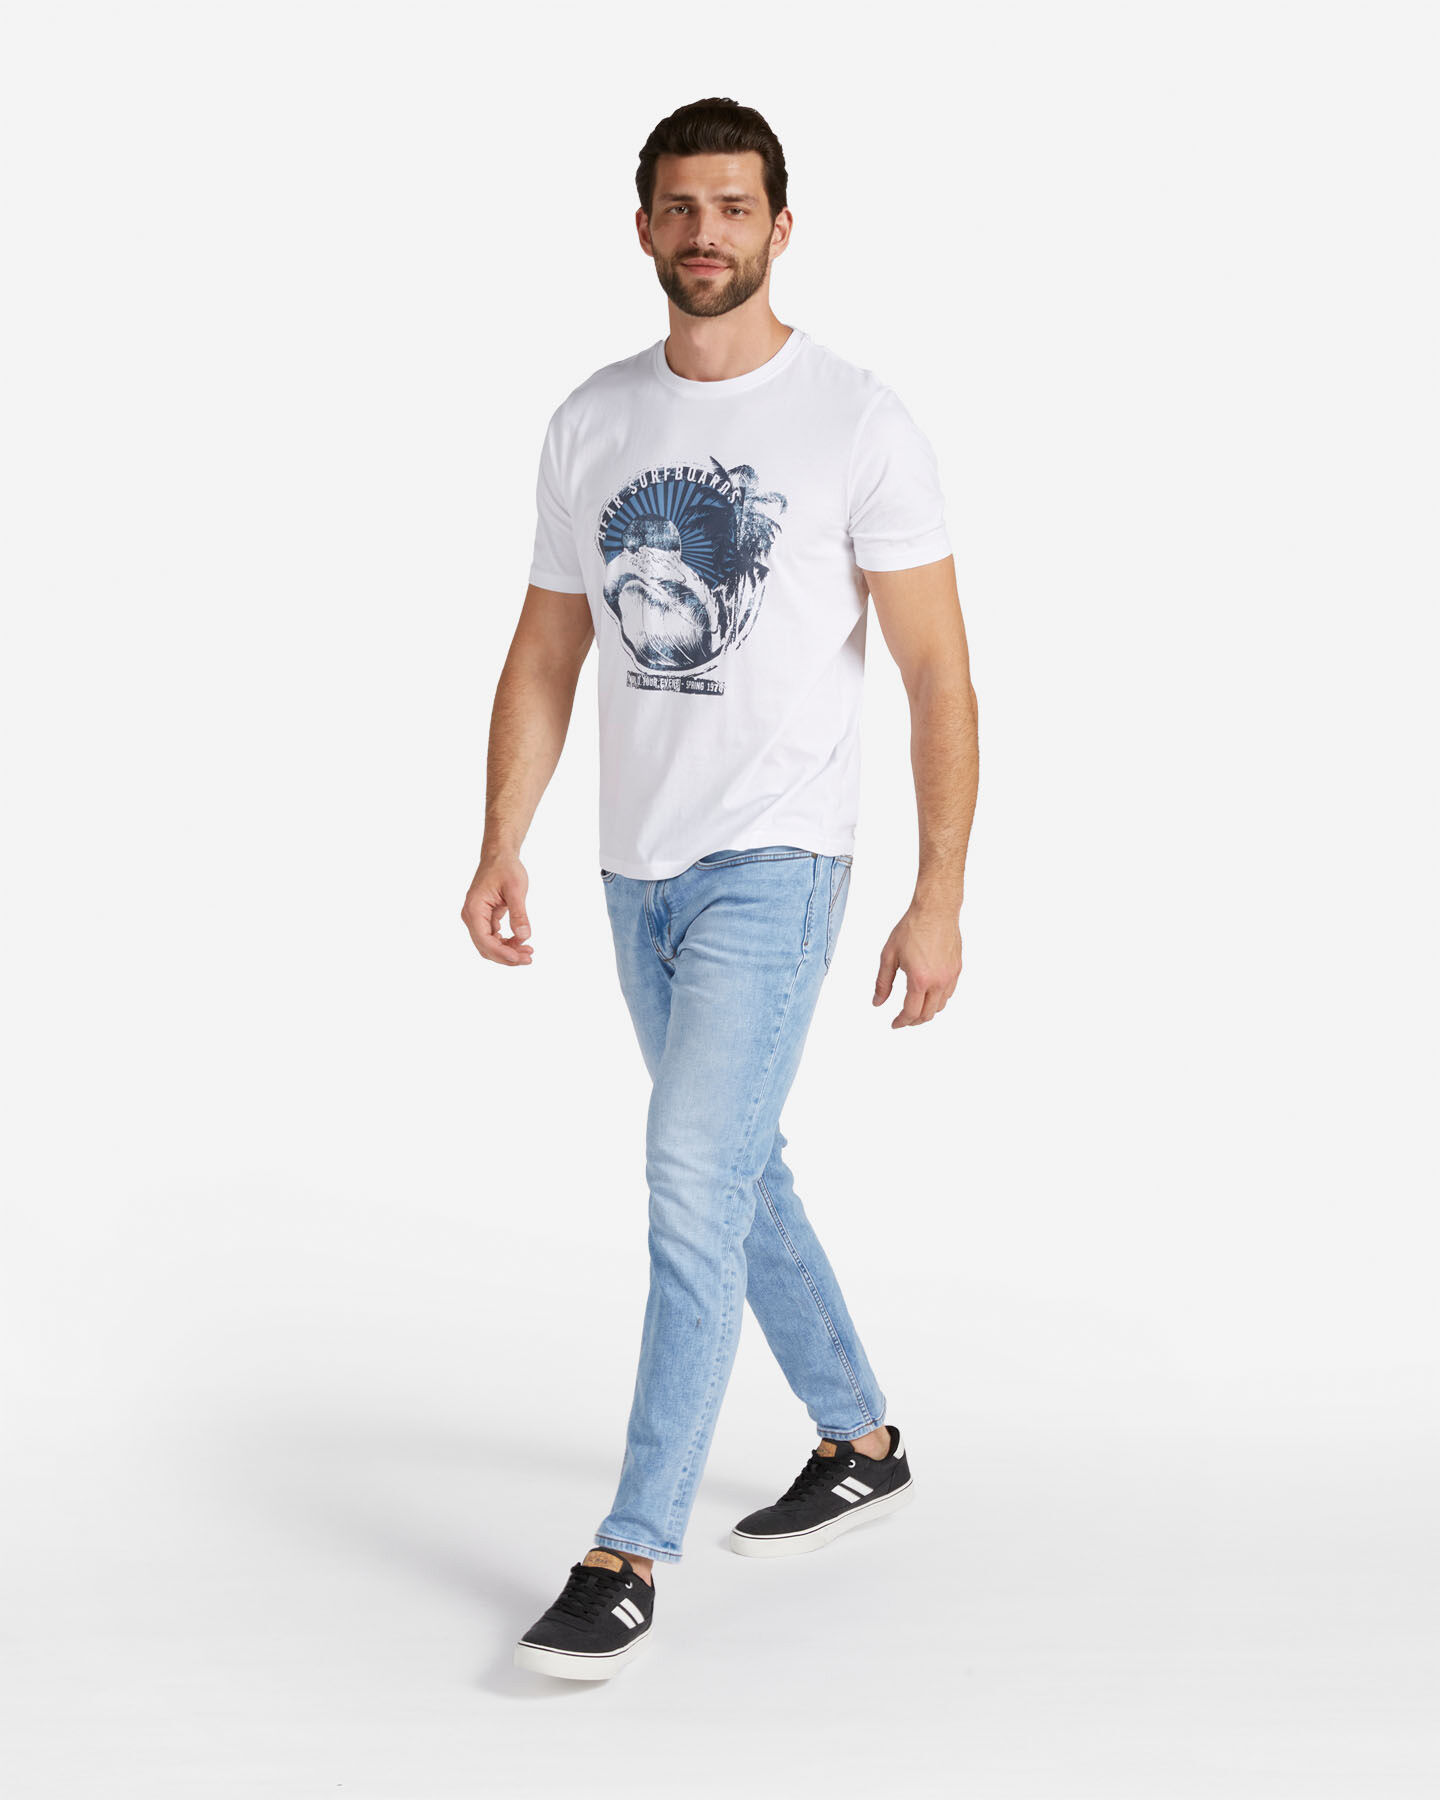  T-Shirt BEAR HERITAGE M S4131622|001A|S scatto 3